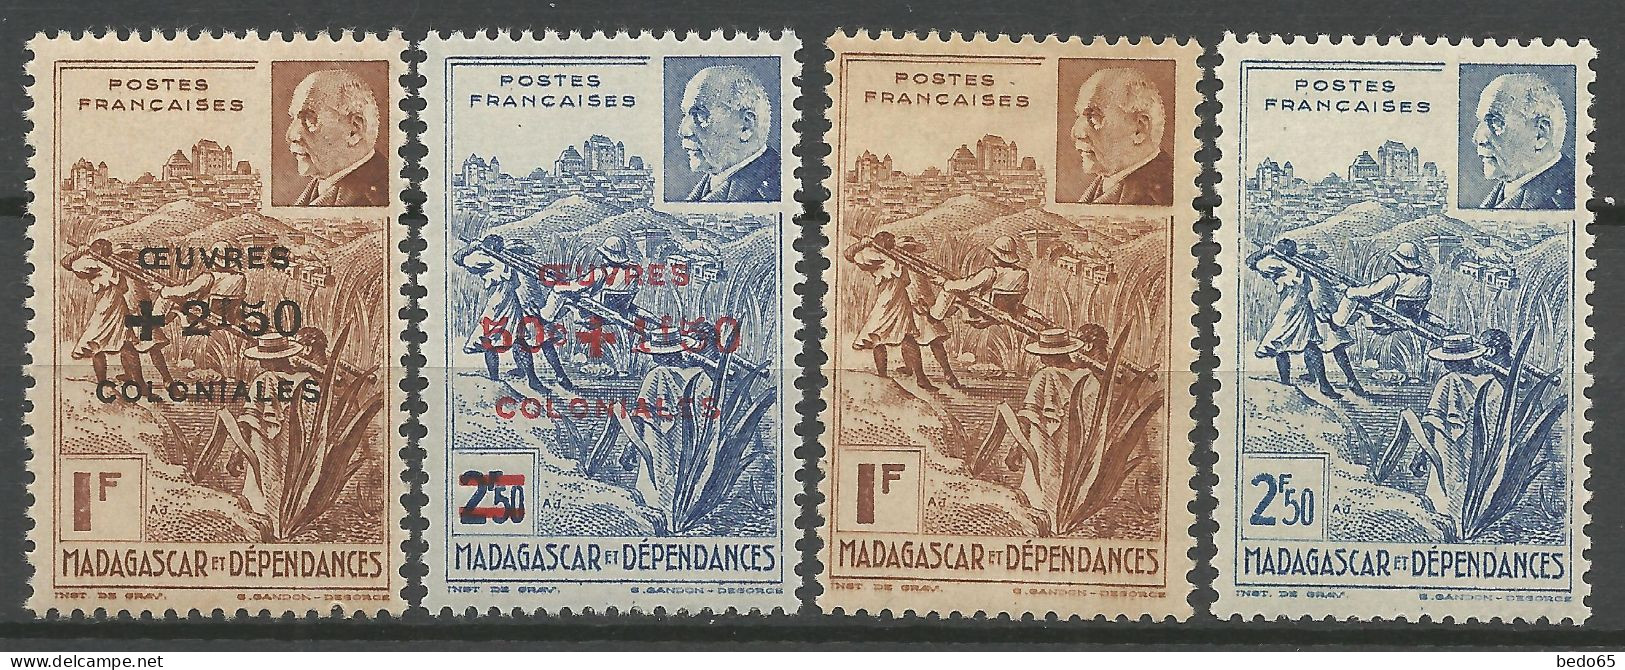 MADAGASCAR  N° 229 / 230 / 284 / 284 NEUF** SANS CHARNIERE NI TRACE / Hingeless  / MNH - Unused Stamps